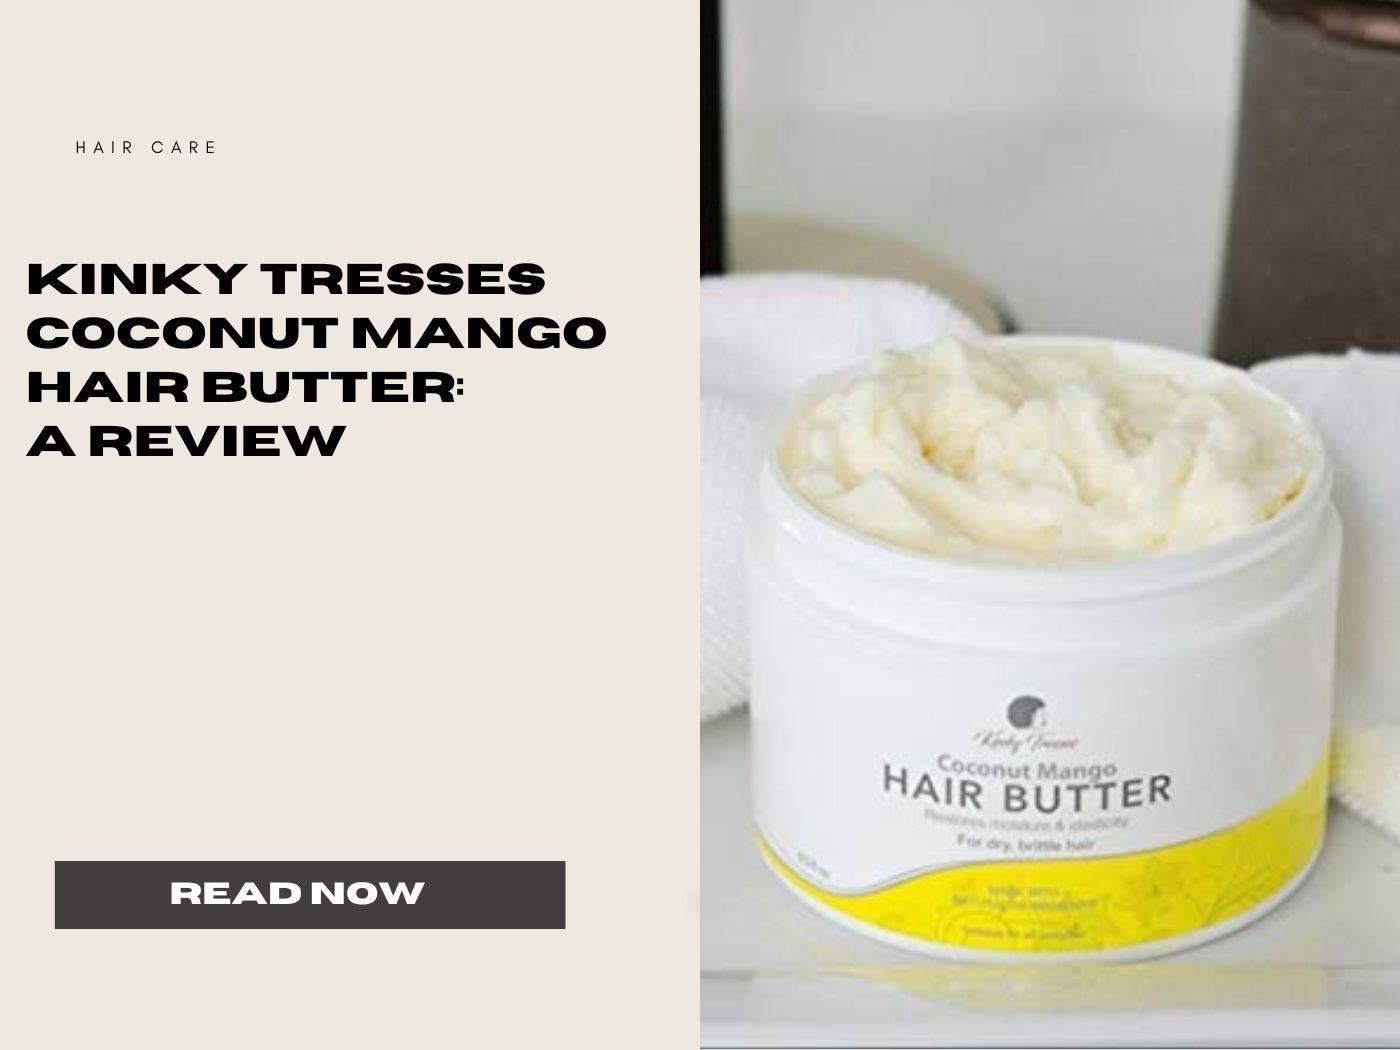 Kinky Tresses Coconut Mango Hair Butter: The Key to Juicy, Defined Curls - A Review